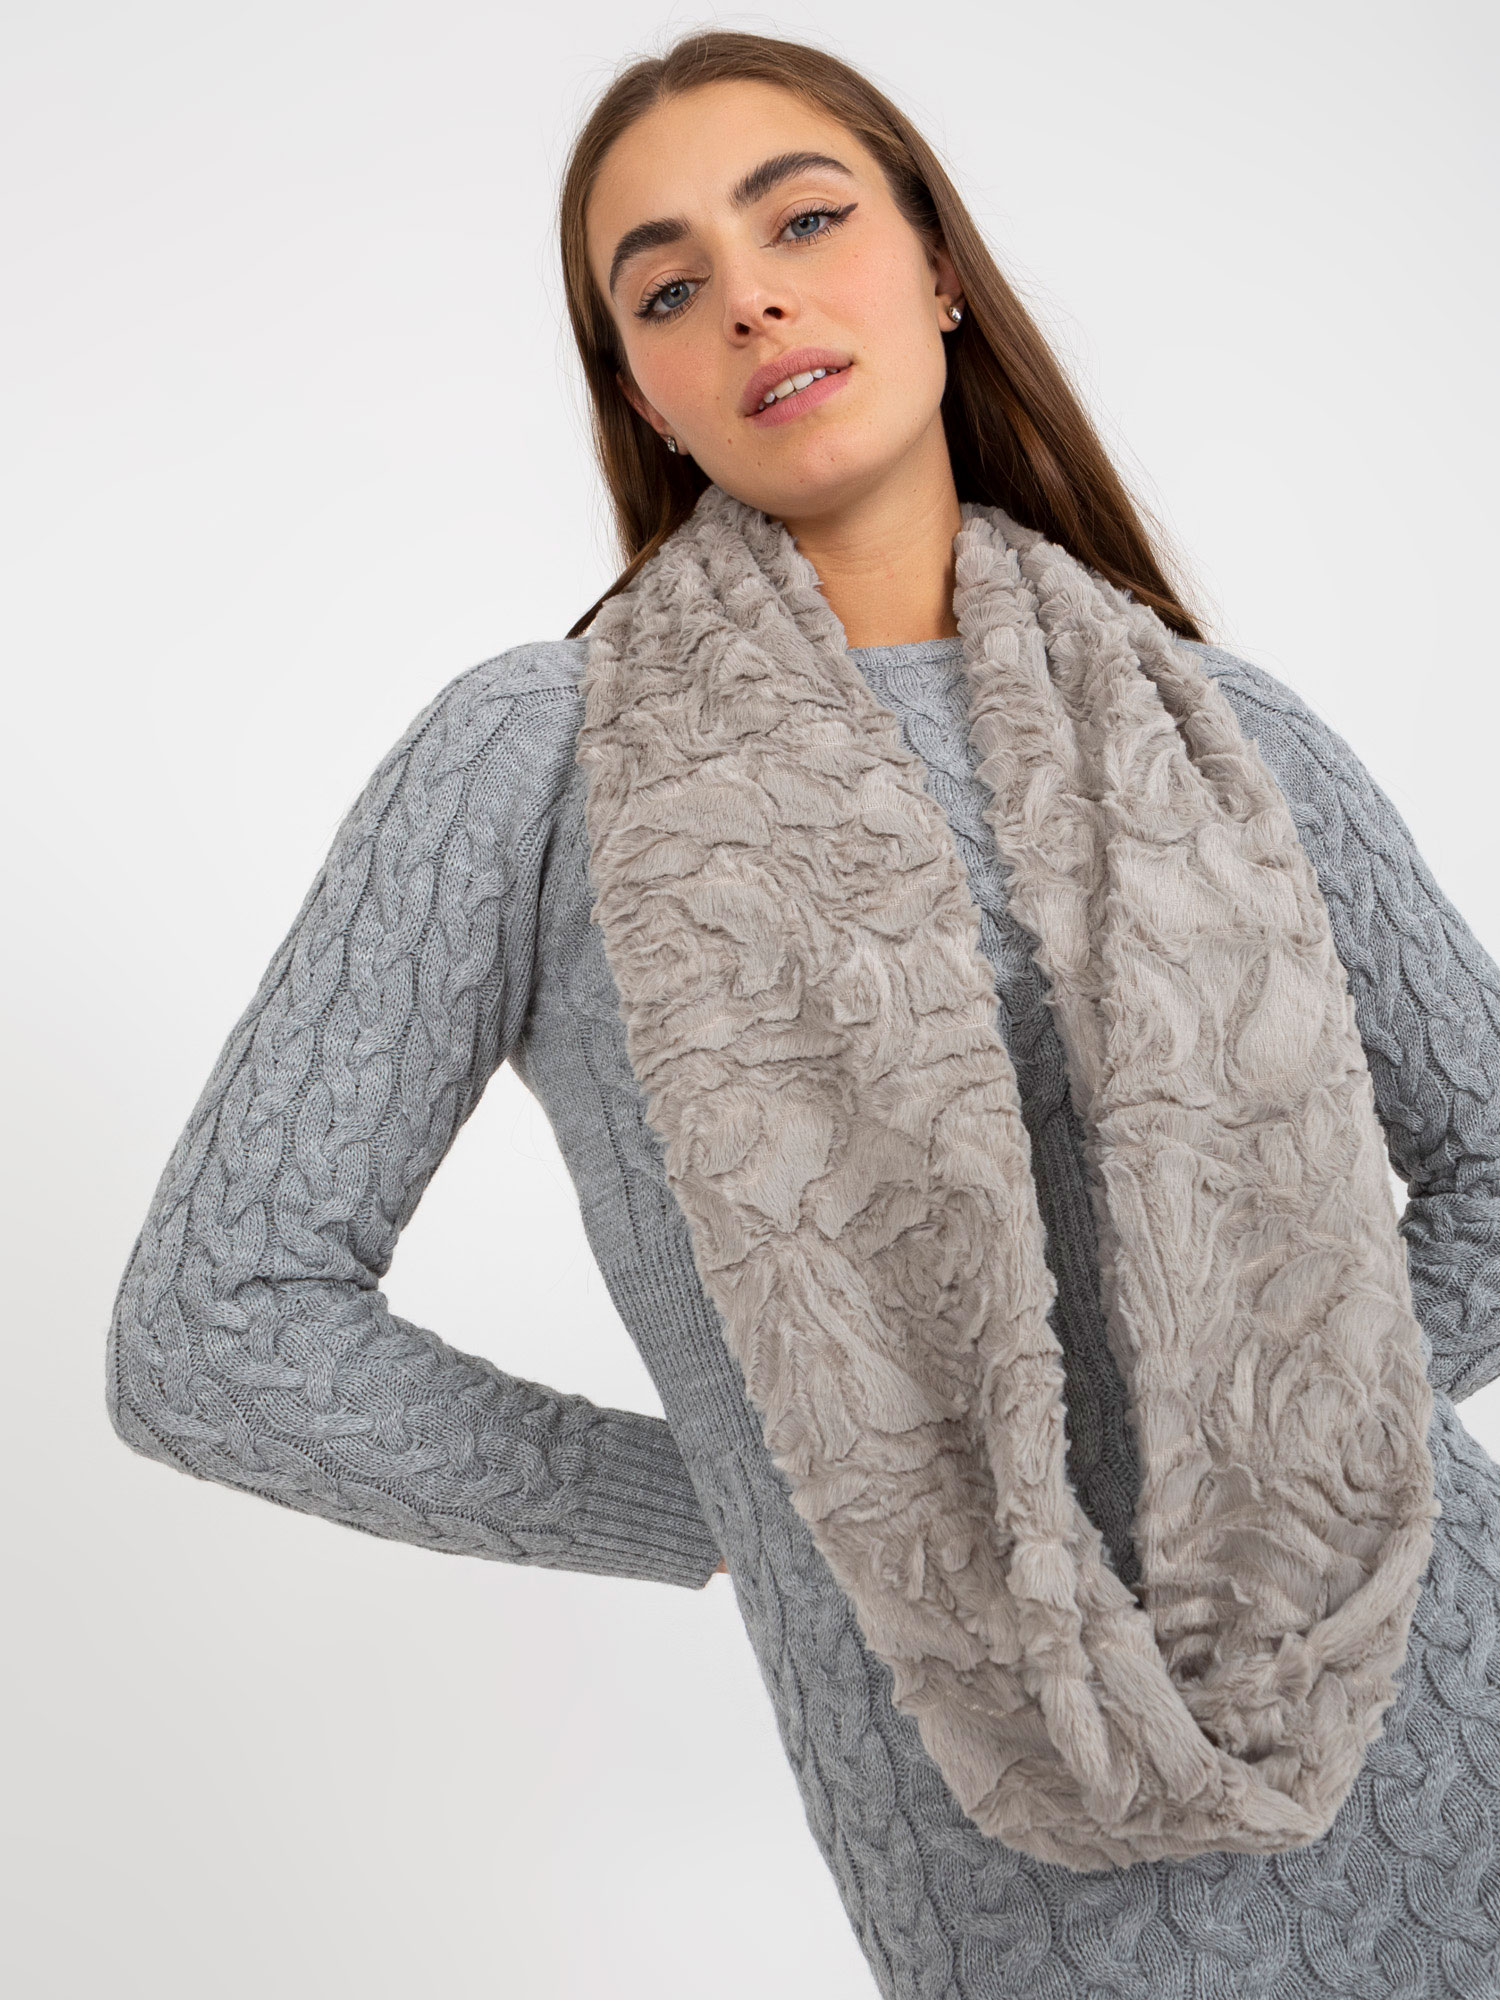 Winter gray scarf made of artificial fur